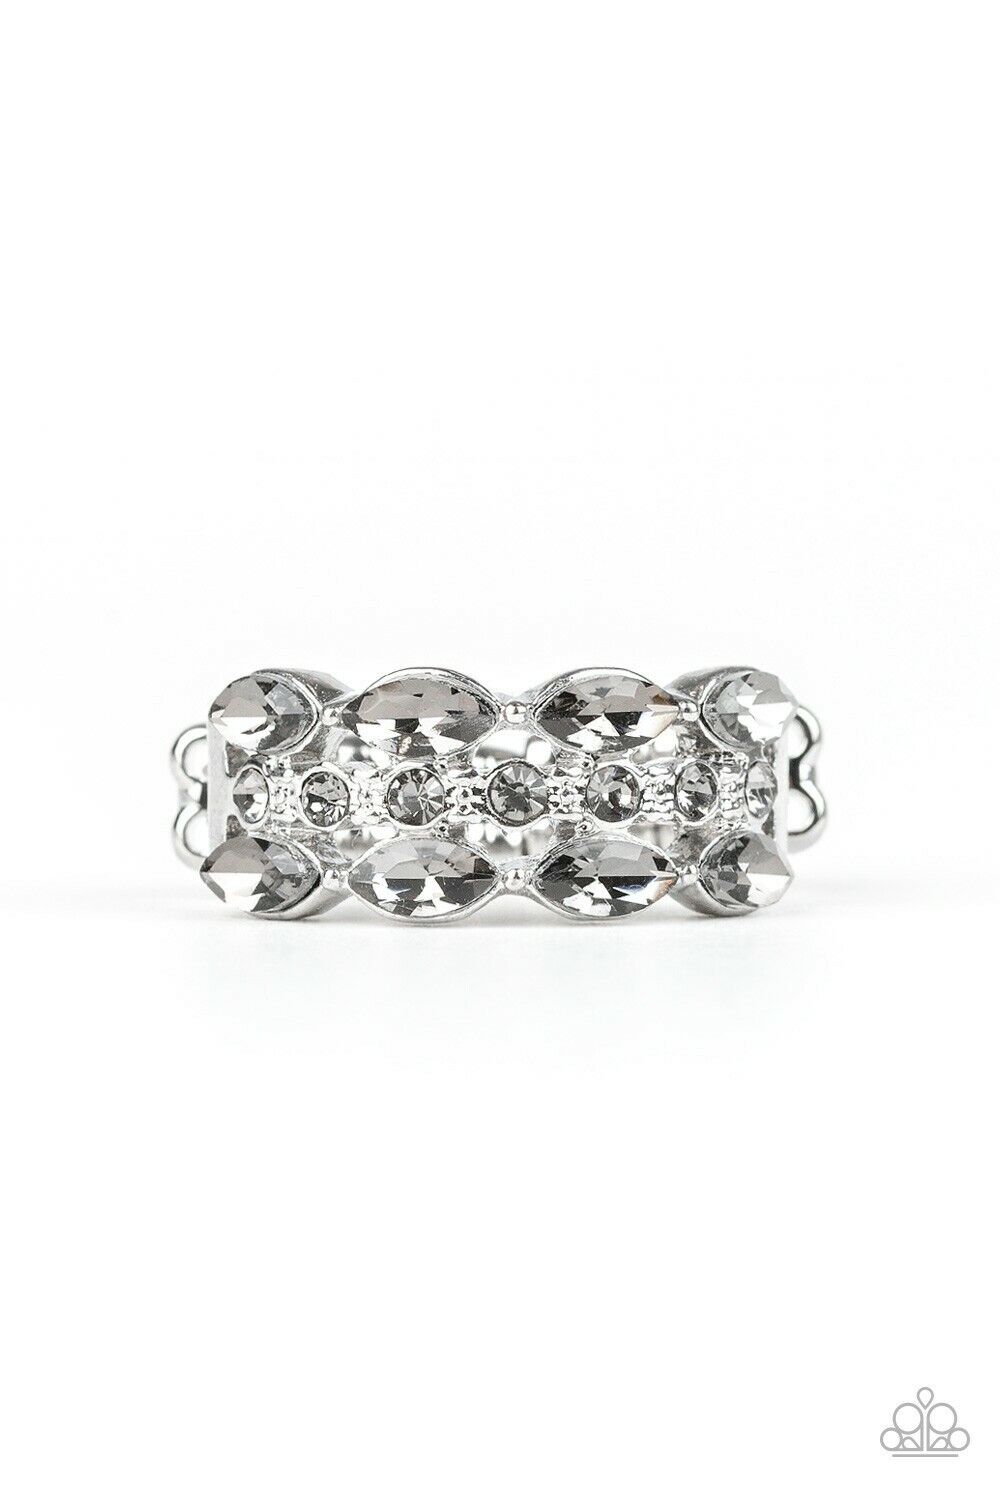 Distractingly Demure White Ring - Paparazzi Accessories- lightbox - CarasShop.com - $5 Jewelry by Cara Jewels